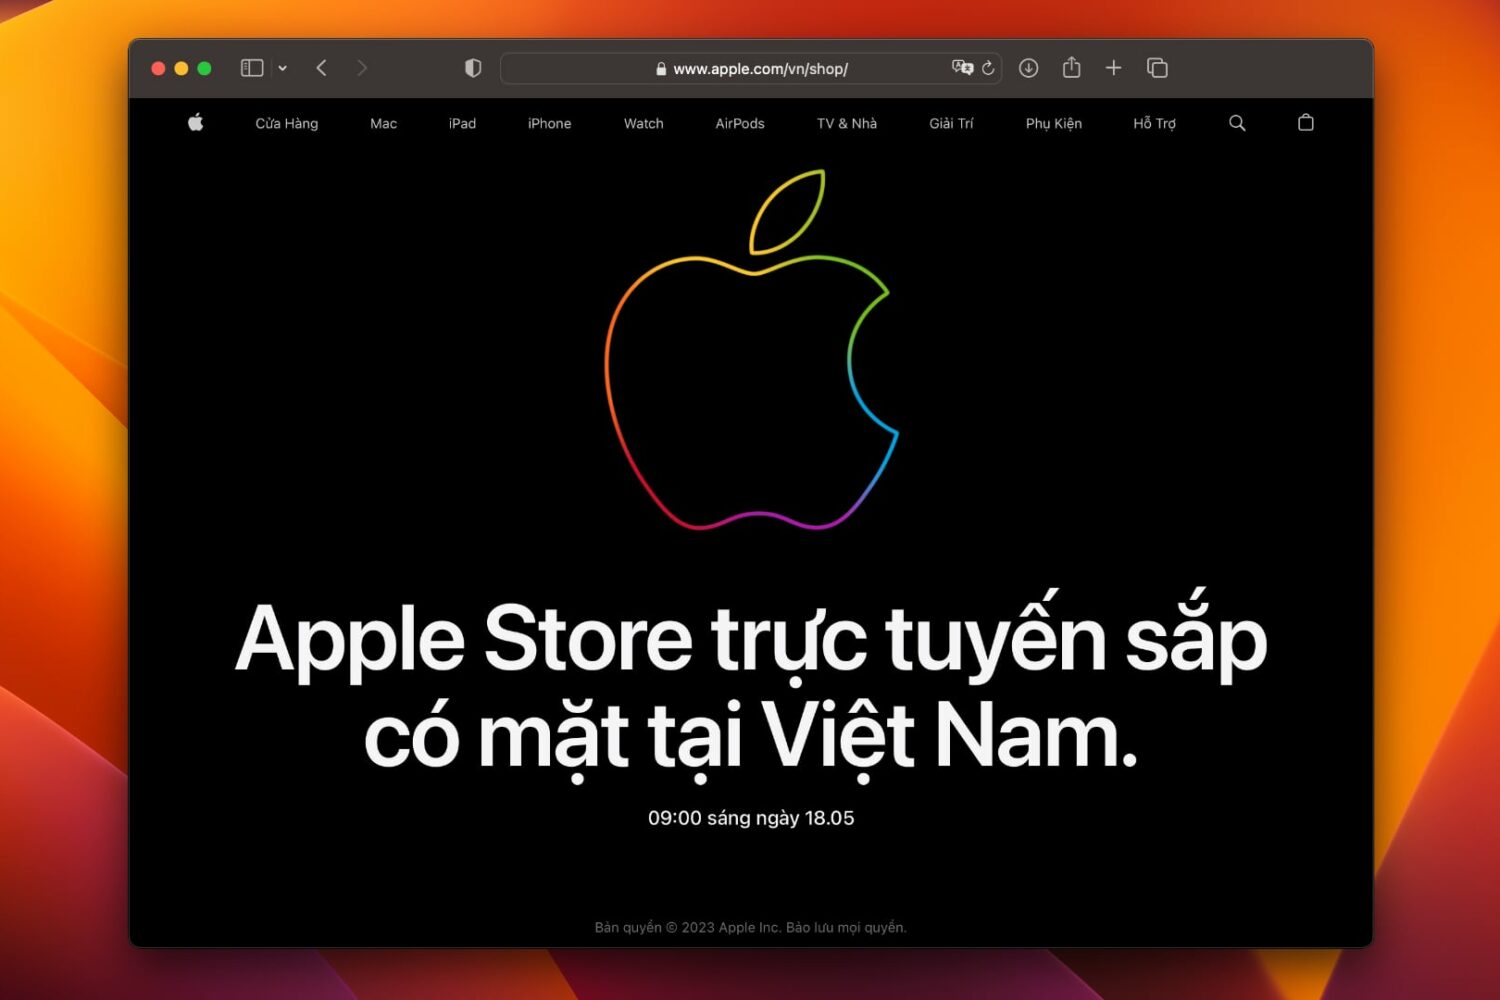 Apple's Vietnamese online store in Safari announcing the opening on May 23